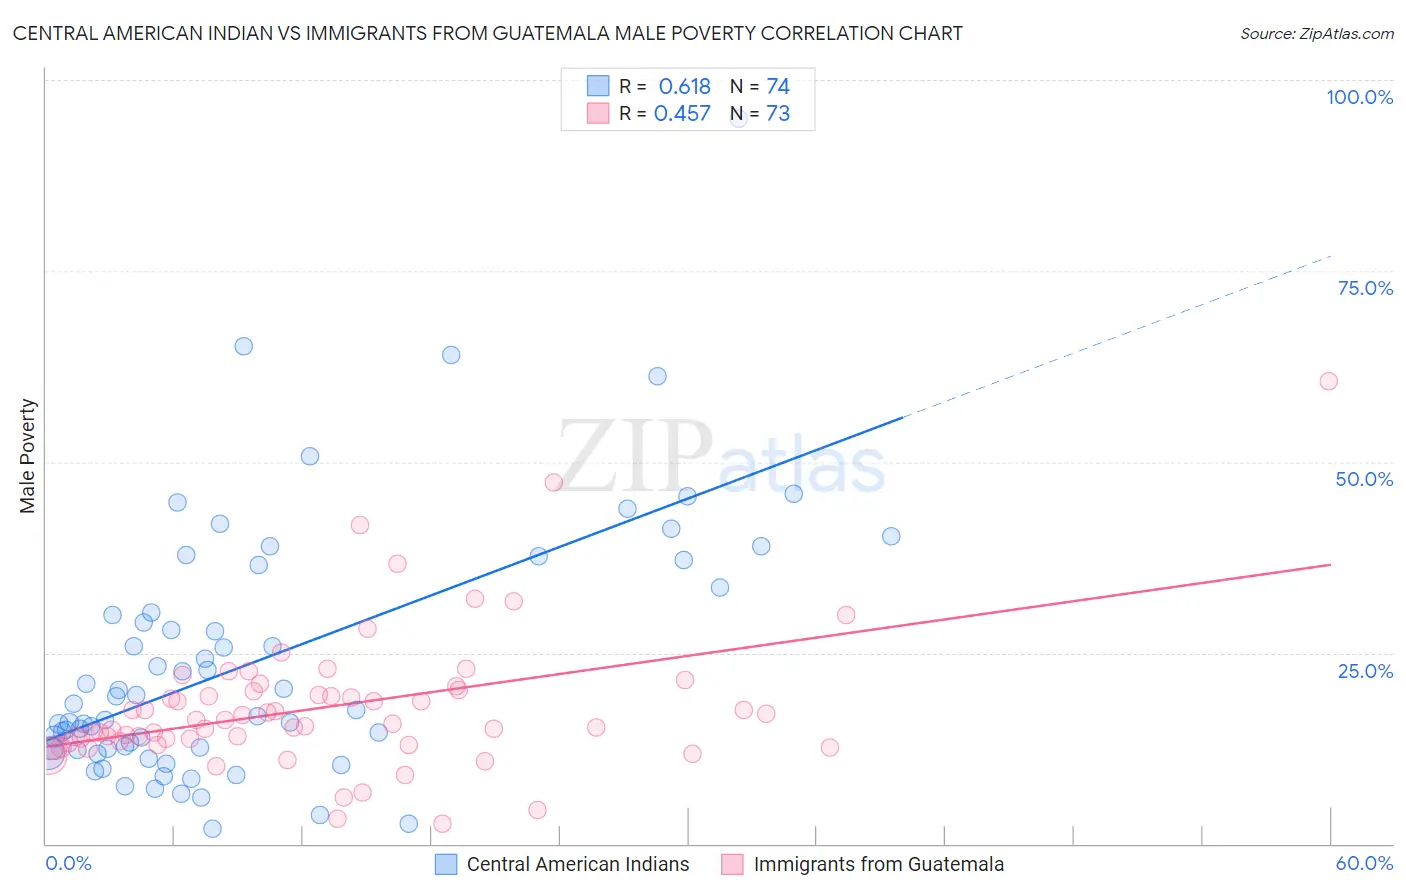 Central American Indian vs Immigrants from Guatemala Male Poverty